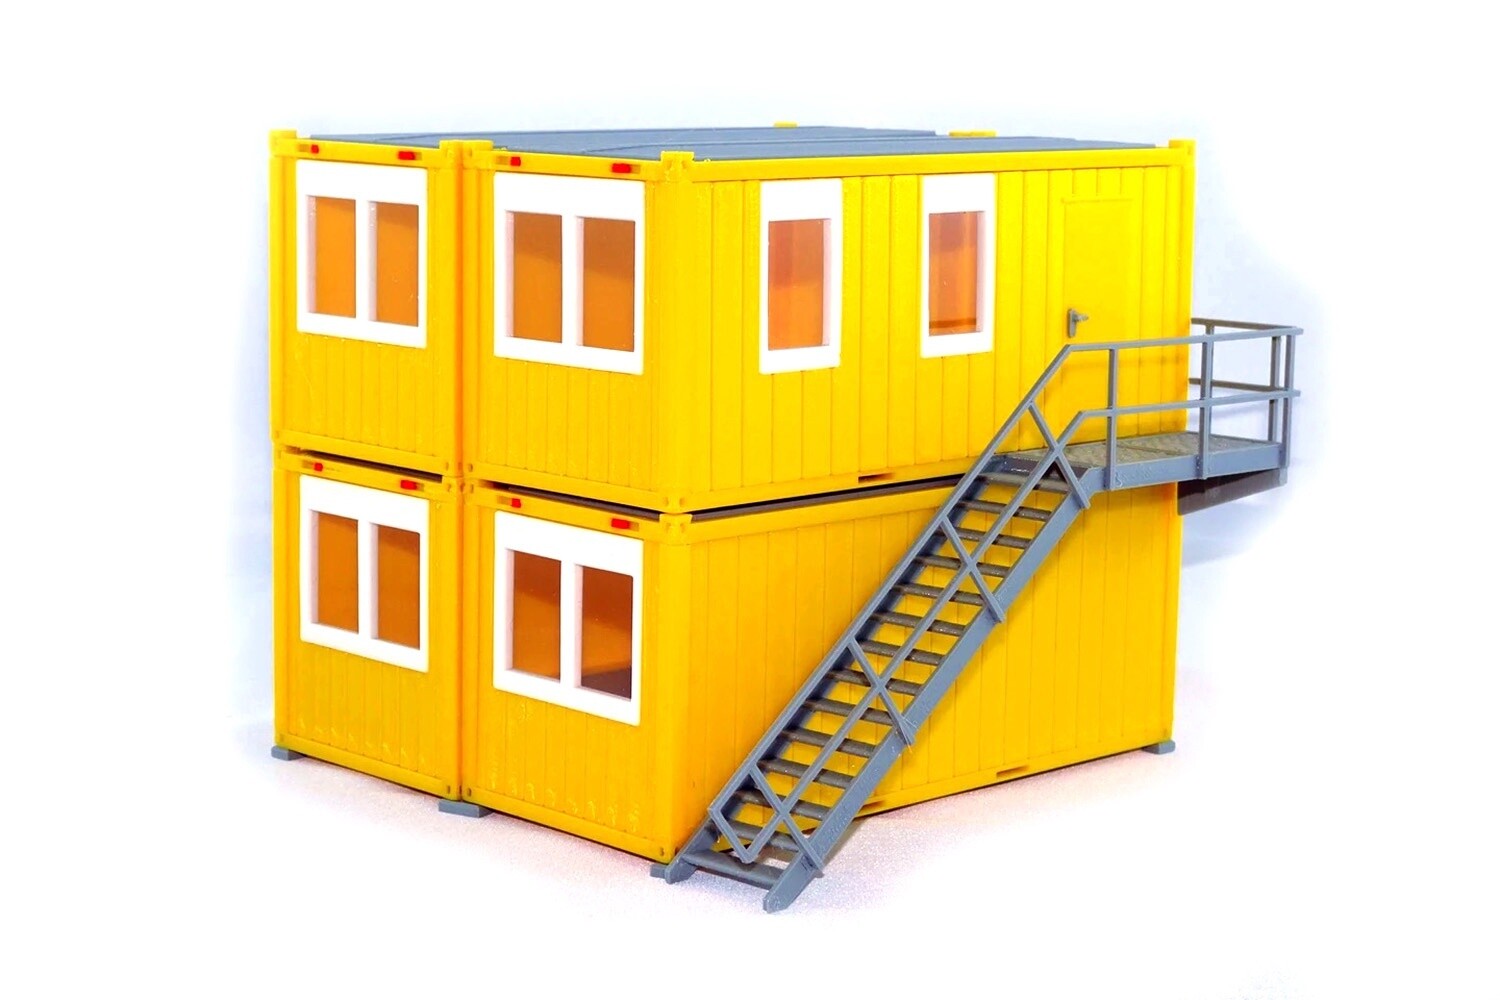 Four Containers Stacked - Set D - Yellow